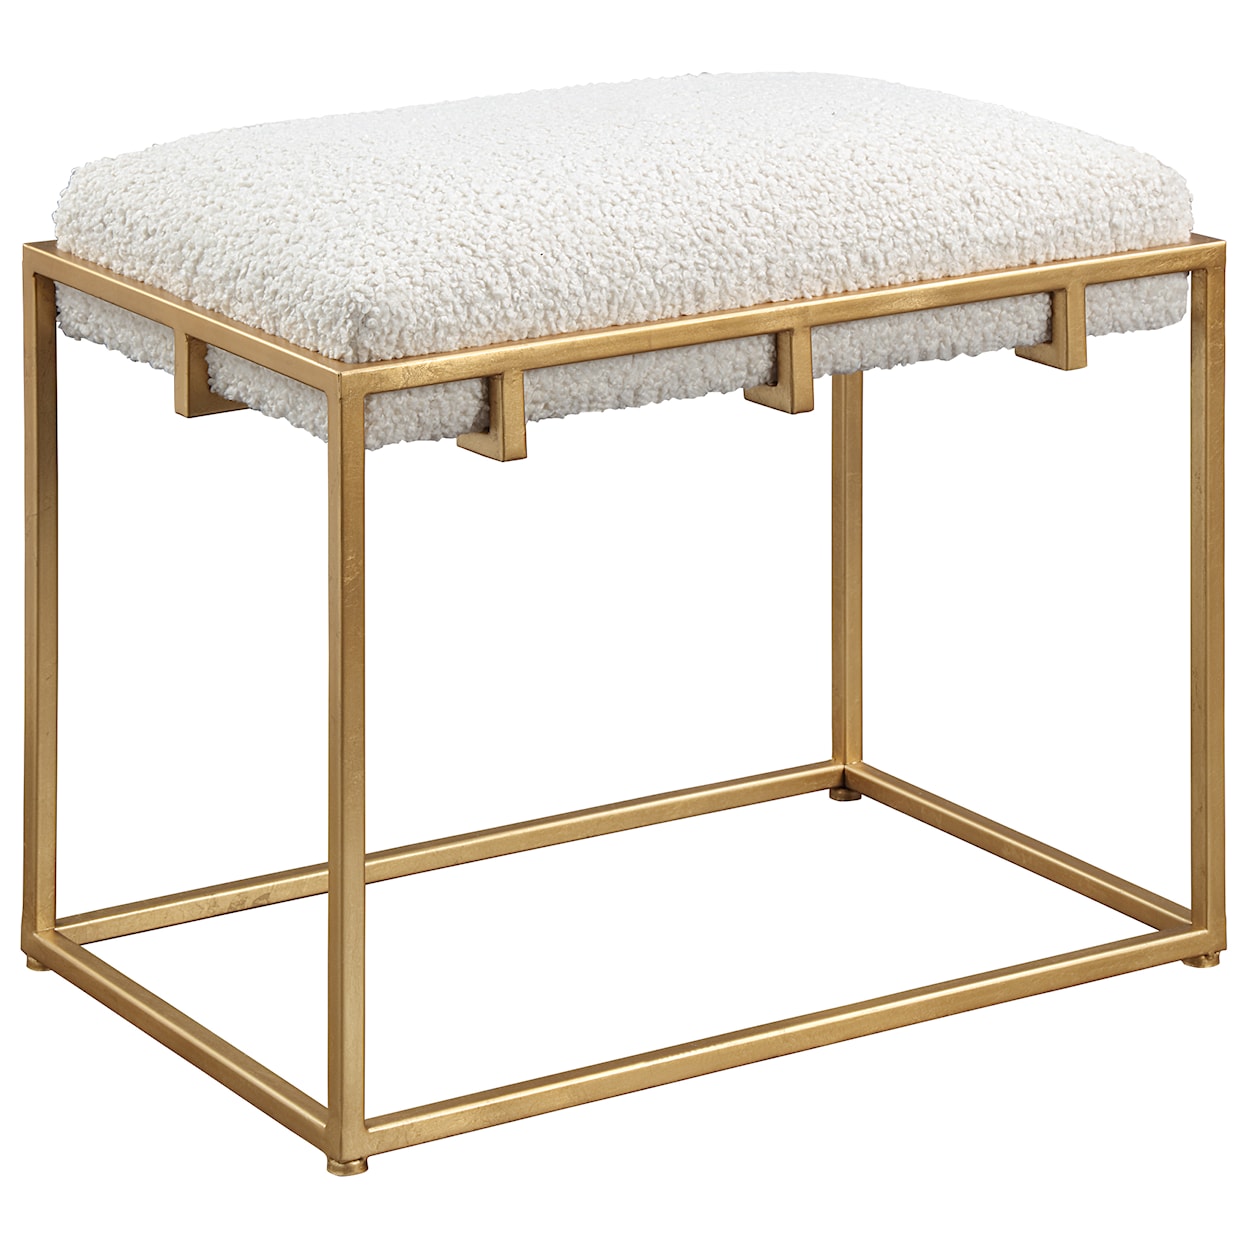 Uttermost Paradox Paradox Small Gold & White Shearling Bench